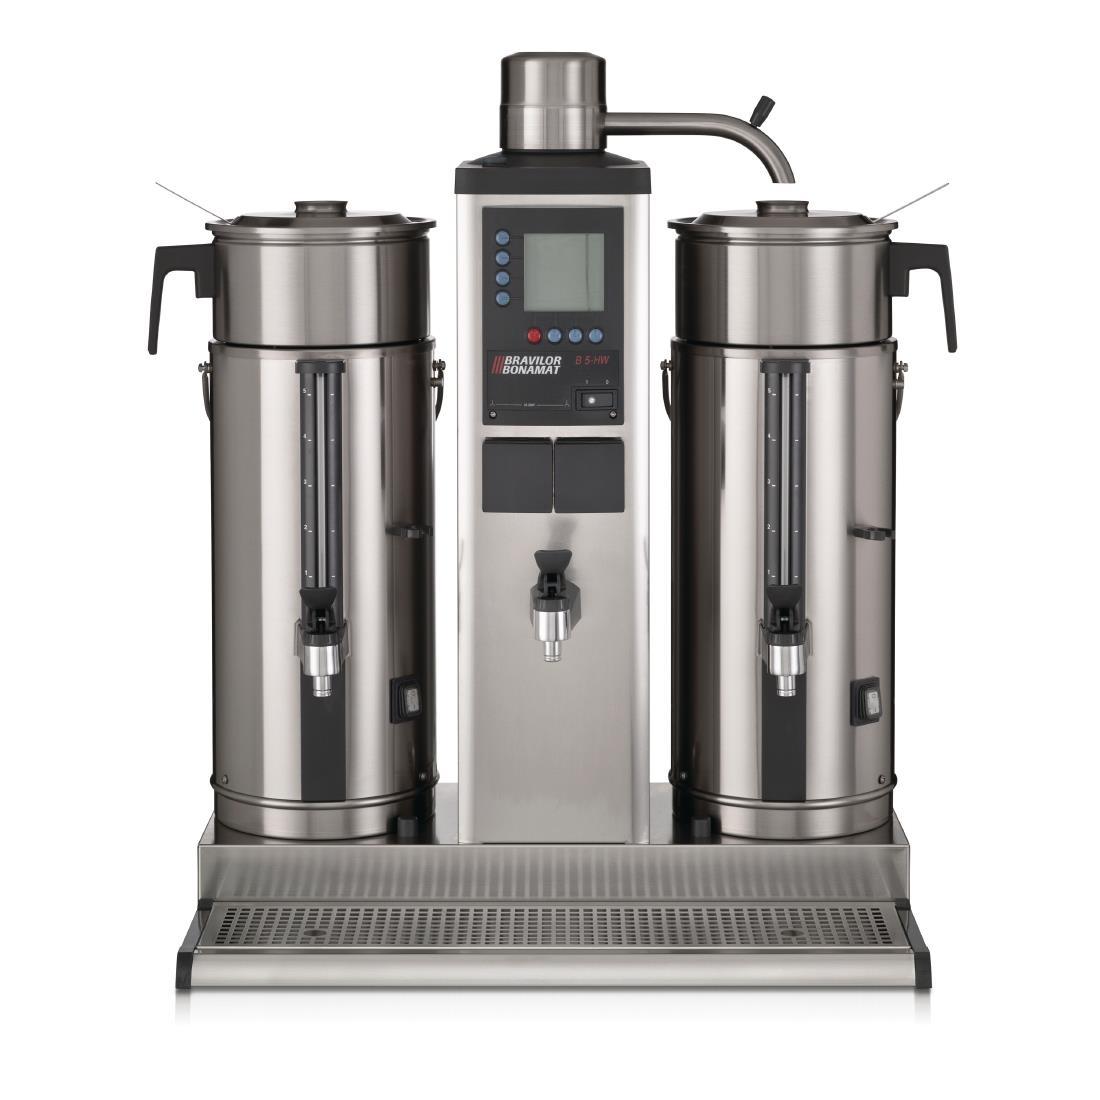 Bravilor B20 HW5 Bulk Coffee Brewer with 2x20Ltr Coffee Urns and Hot Water Tap 3 Phase - DC693-3P50  - 2